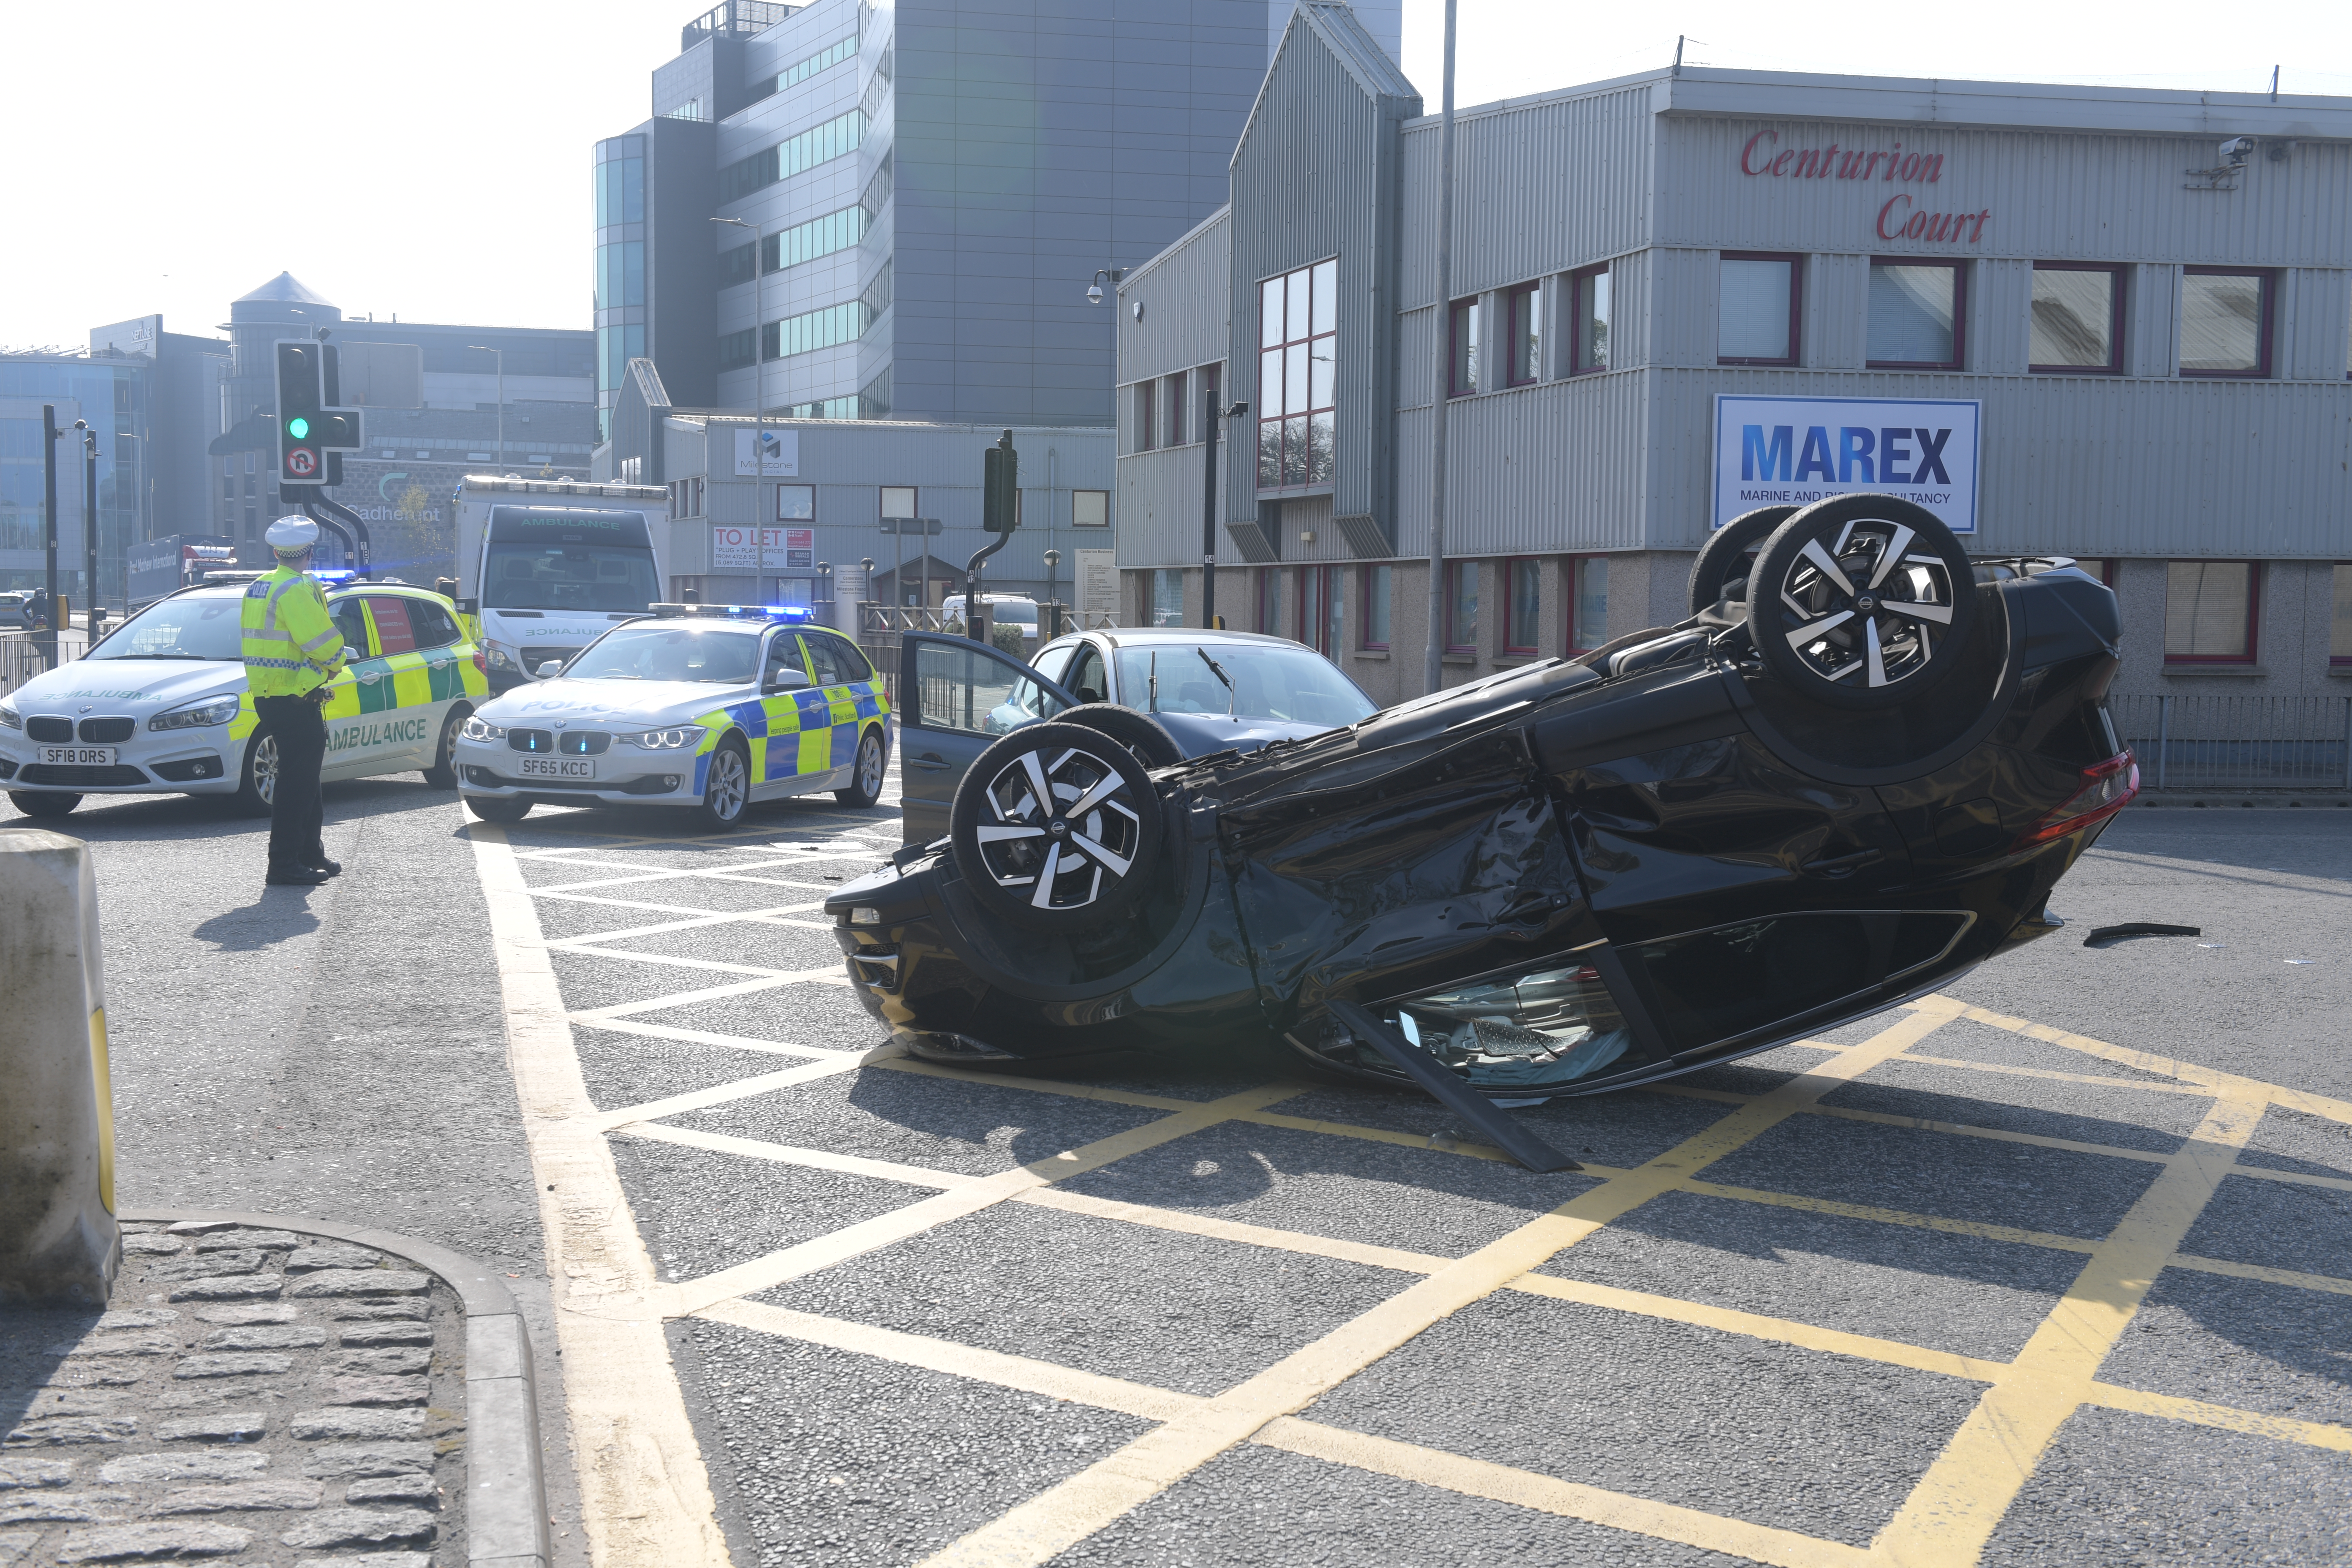 The scene of the collision in Aberdeen